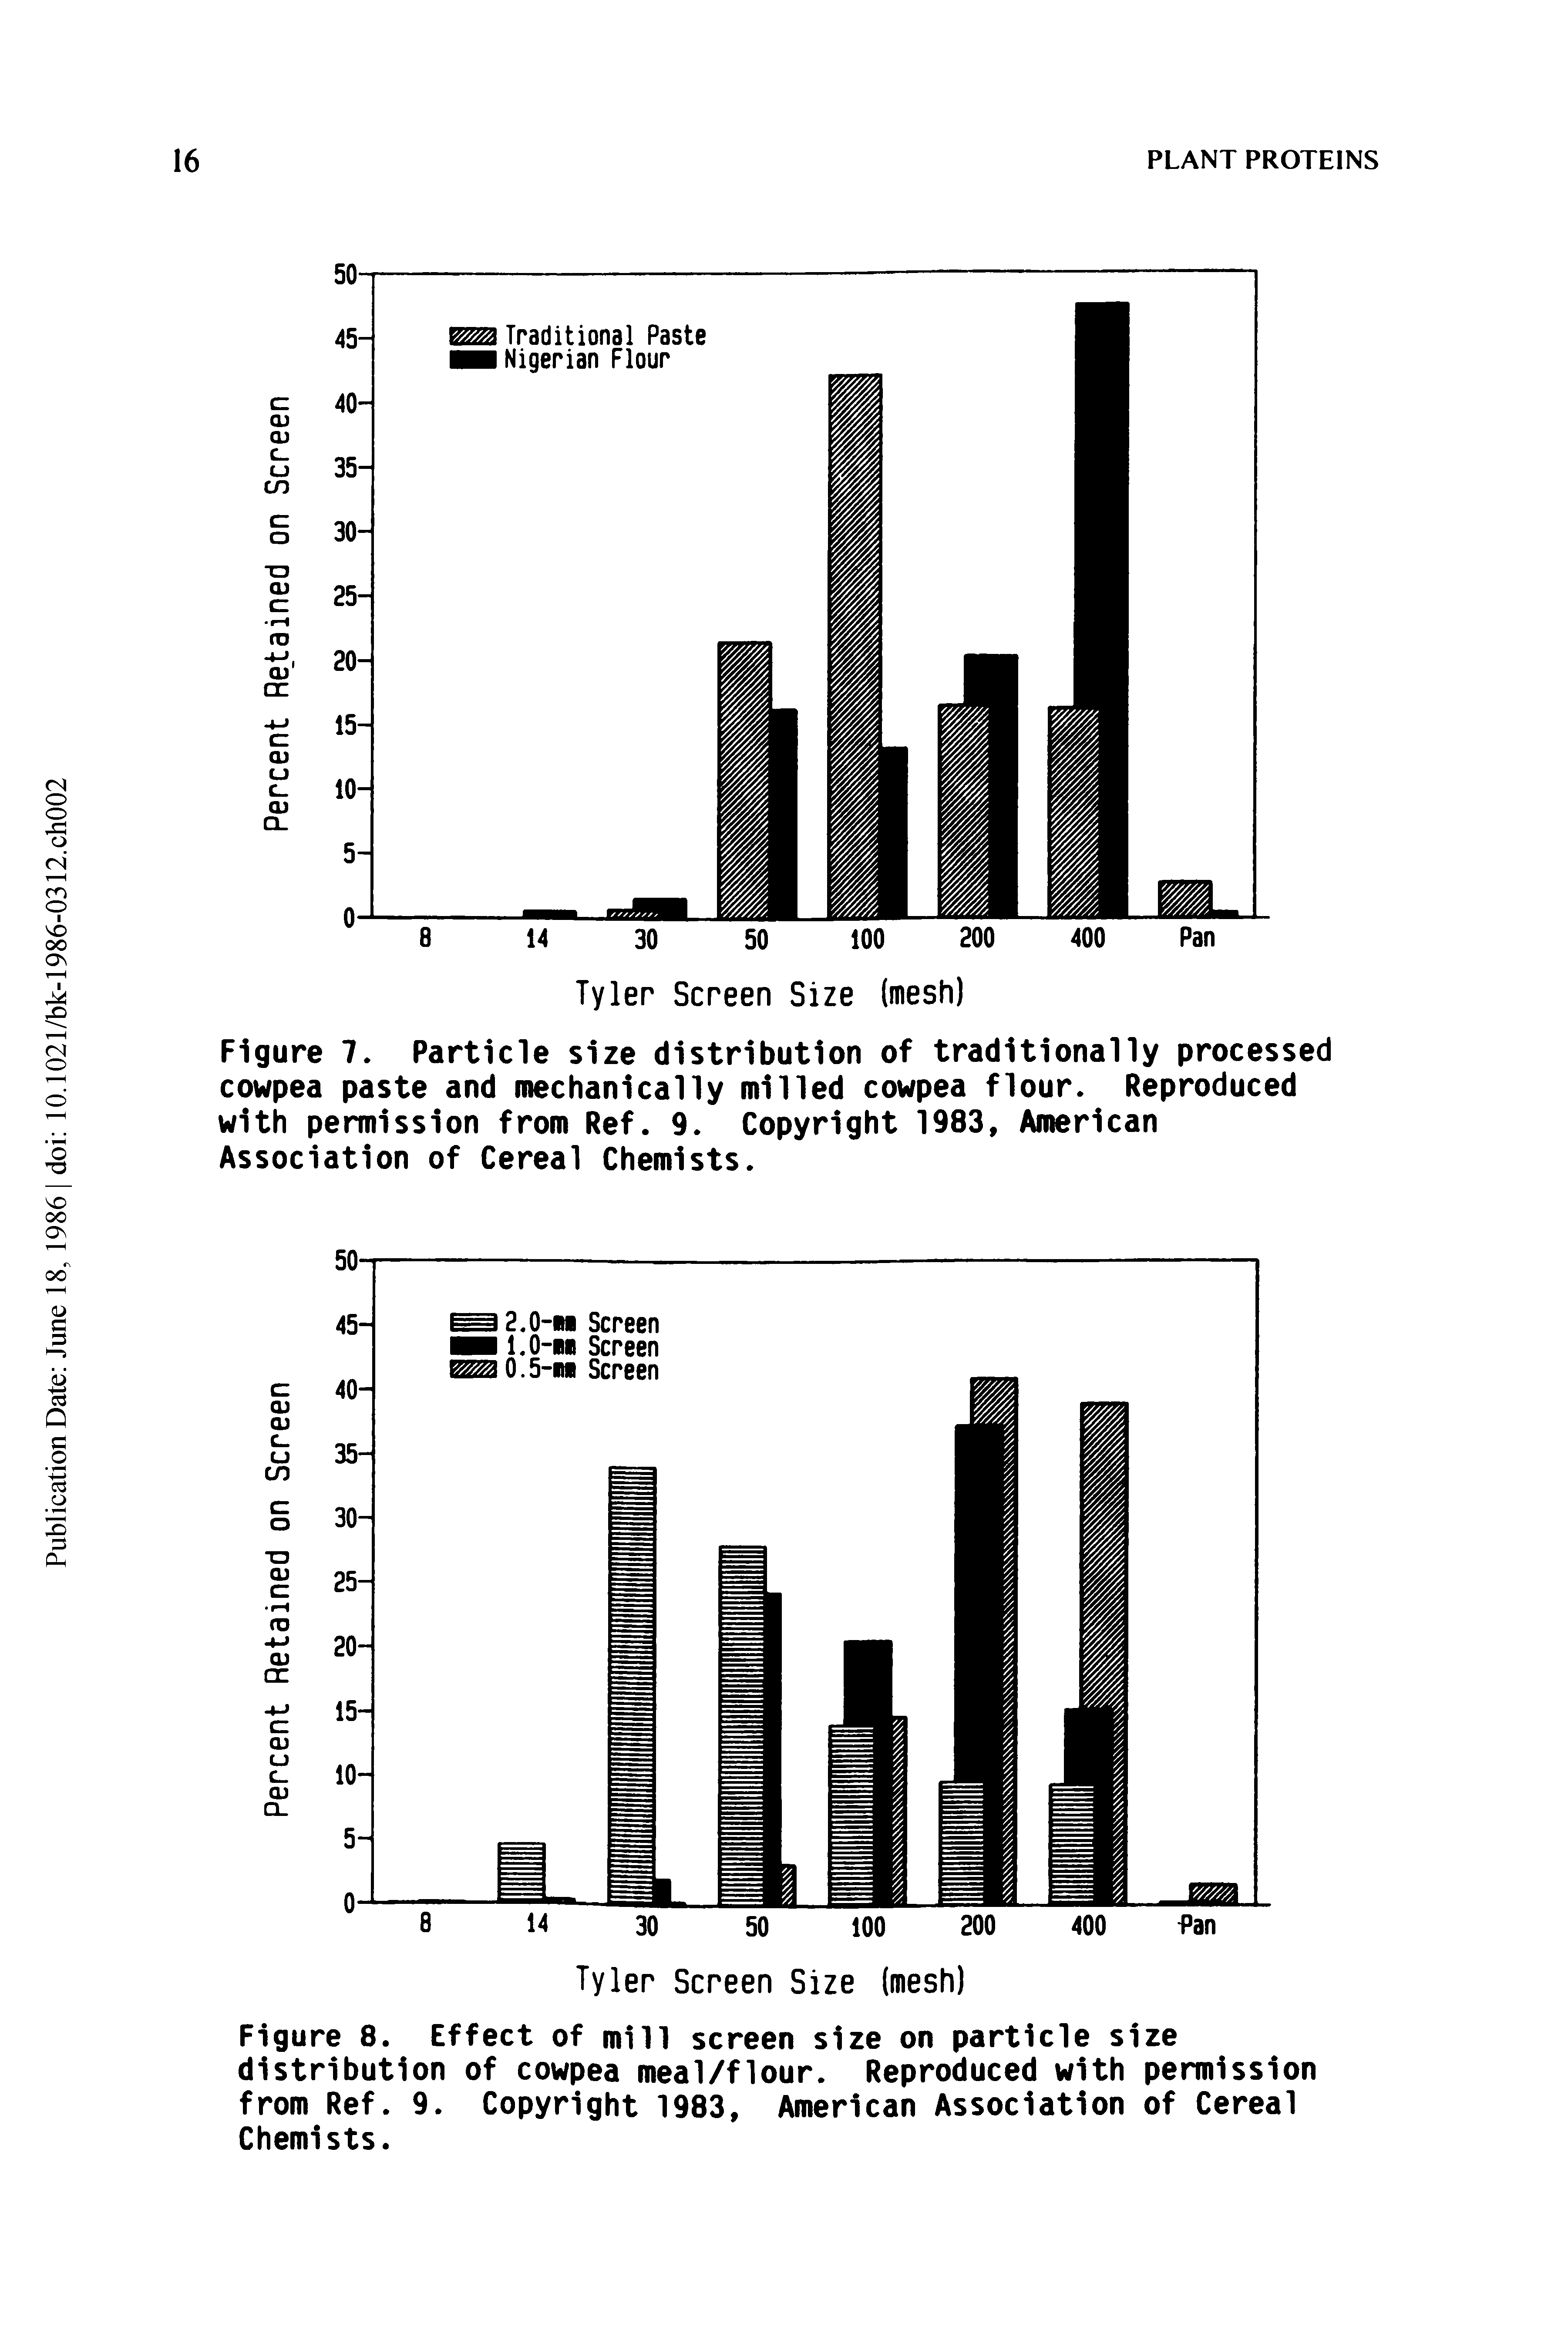 Figure 7. Particle size distribution of traditionally processed cowpea paste and mechanically milled cowpea flour. Reproduced with permission from Ref. 9. Copyright 1983, American Association of Cereal Chemists.